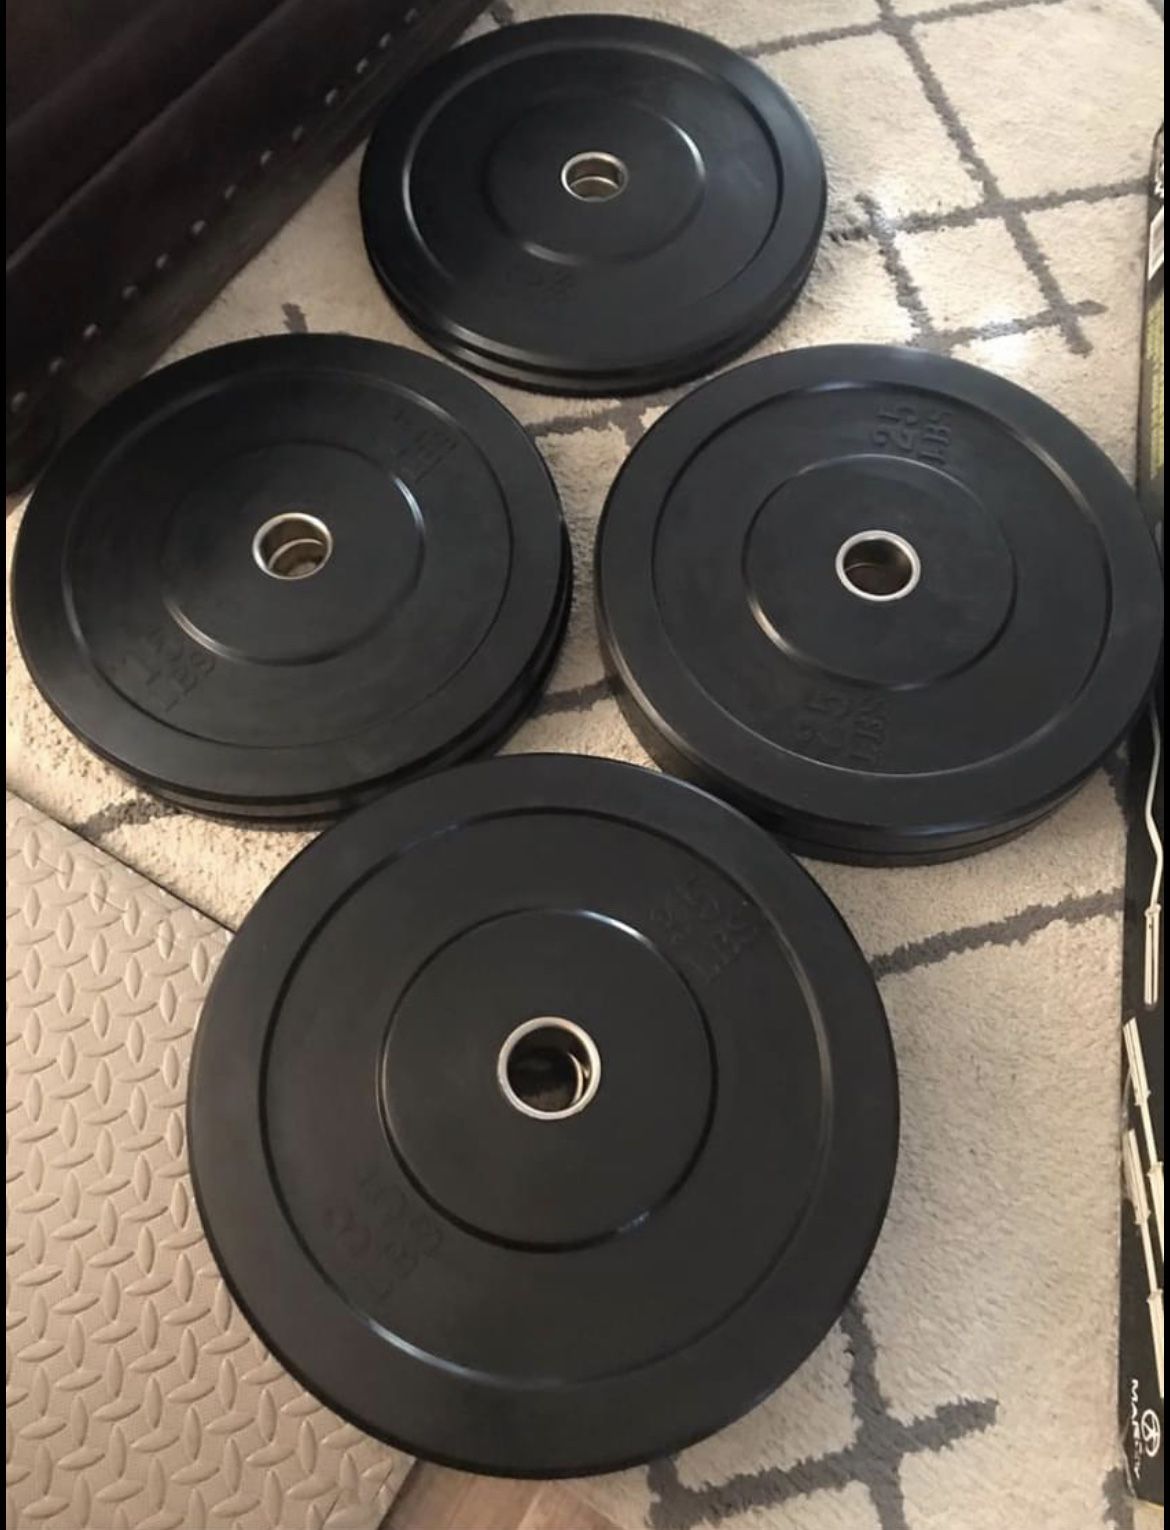 New Rubber 55LB Olympic Bumper Plates 